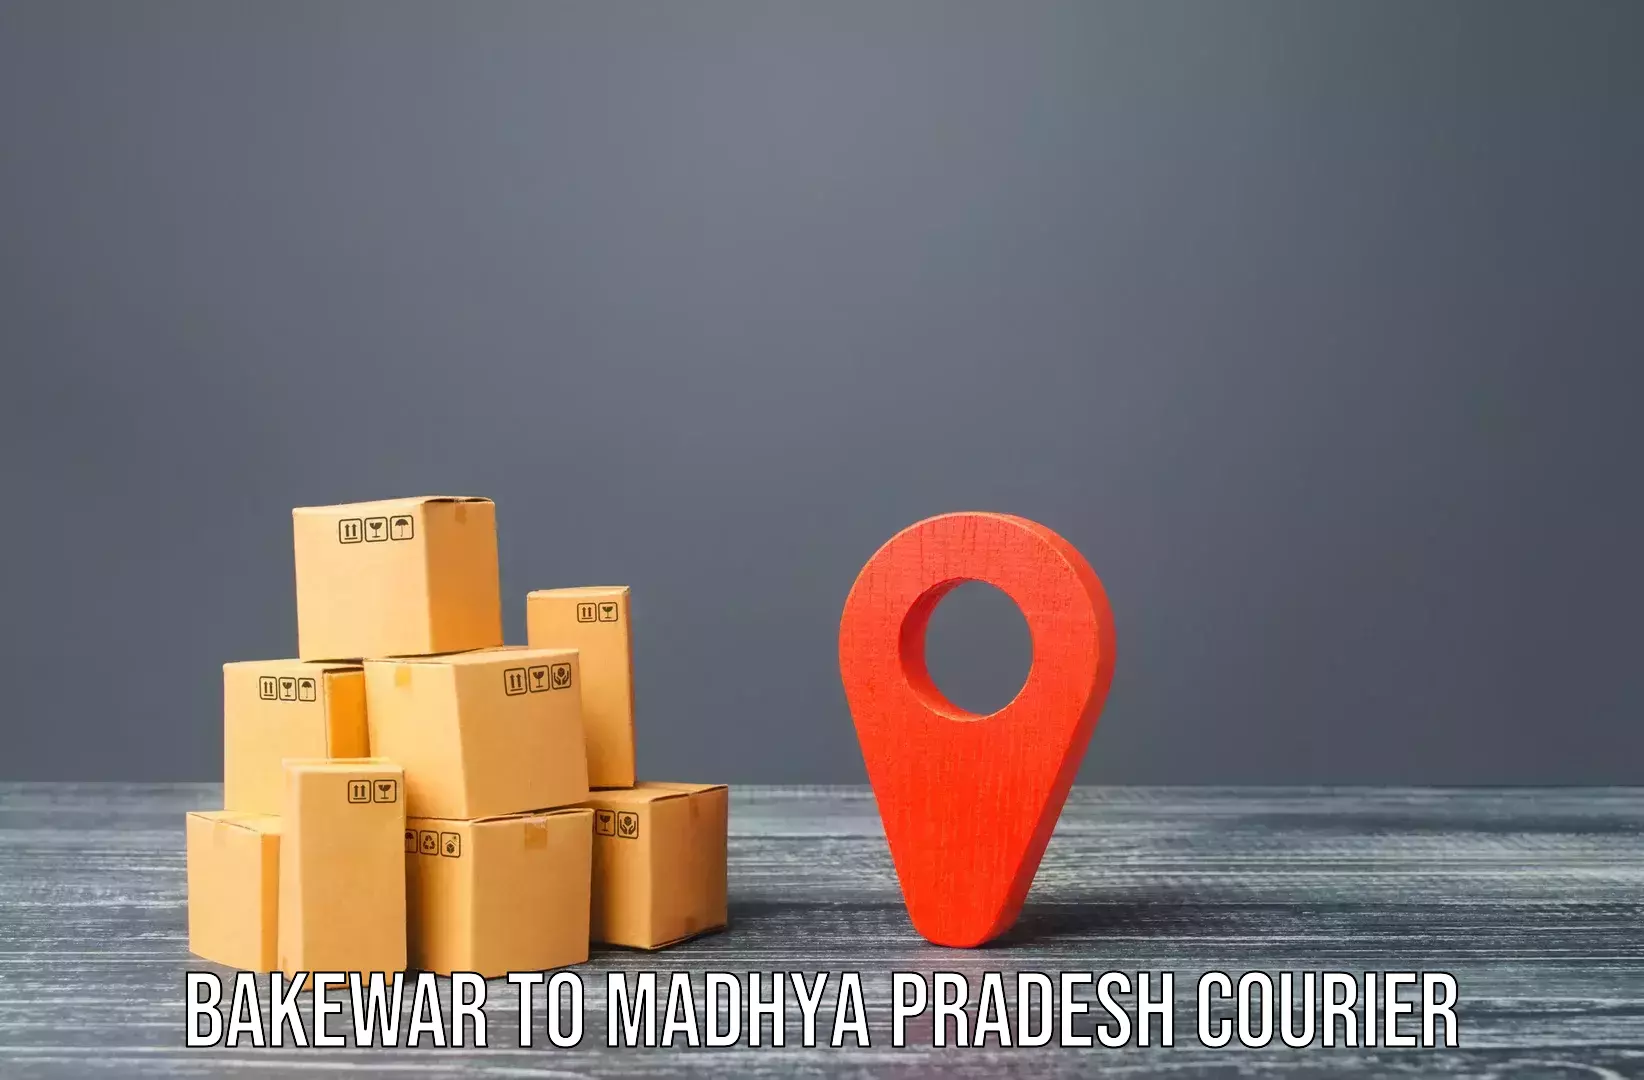 Quality moving and storage in Bakewar to Maheshwar